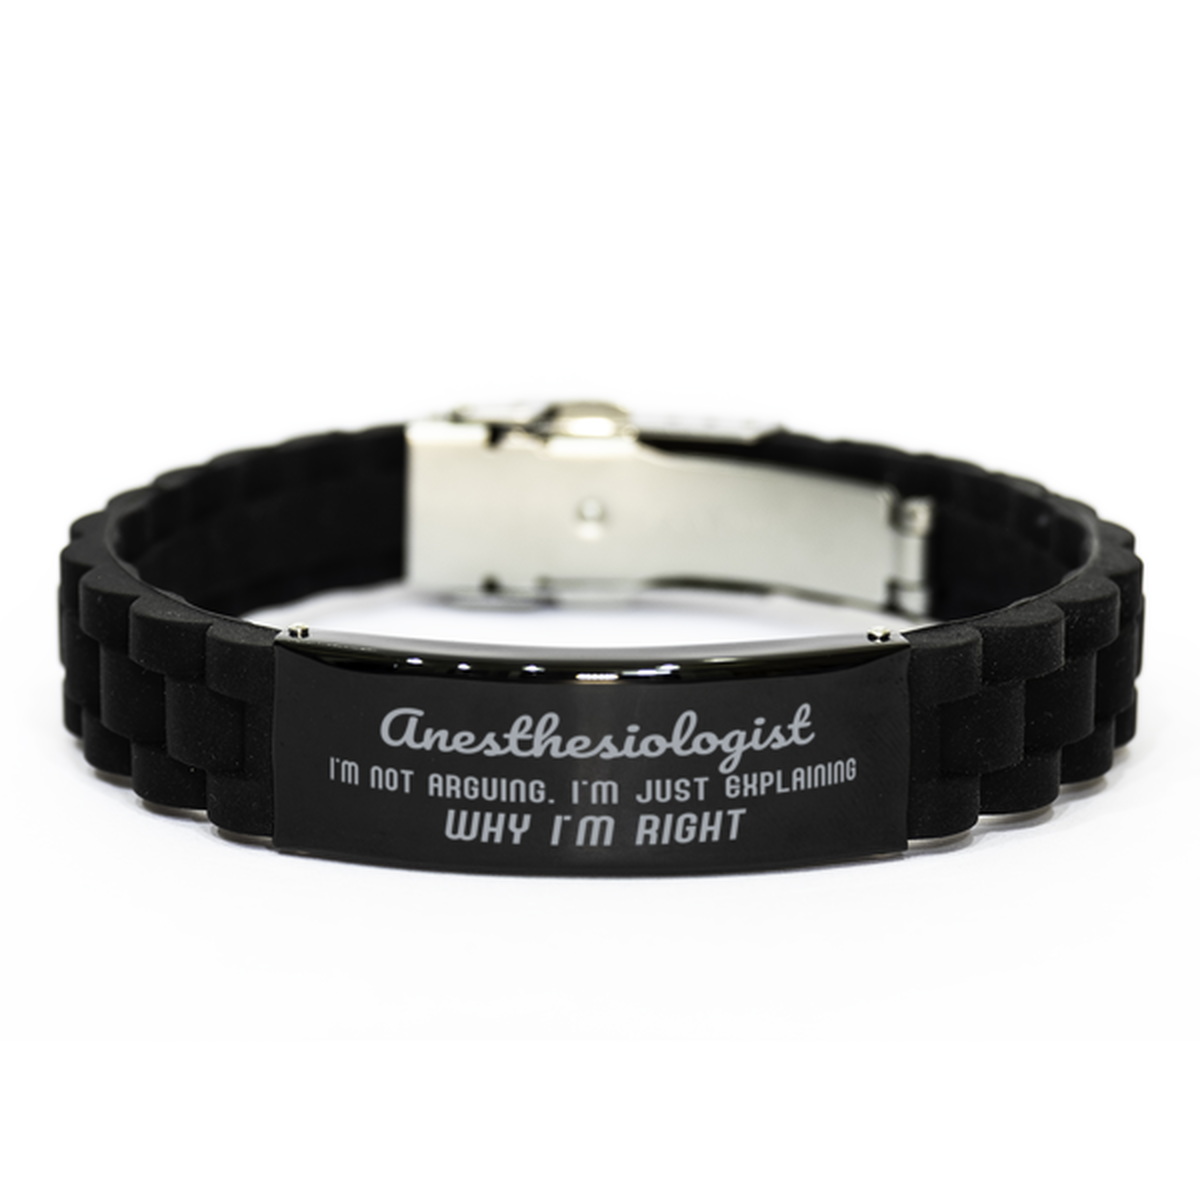 Anesthesiologist I'm not Arguing. I'm Just Explaining Why I'm RIGHT Black Glidelock Clasp Bracelet, Funny Saying Quote Anesthesiologist Gifts For Anesthesiologist Graduation Birthday Christmas Gifts for Men Women Coworker